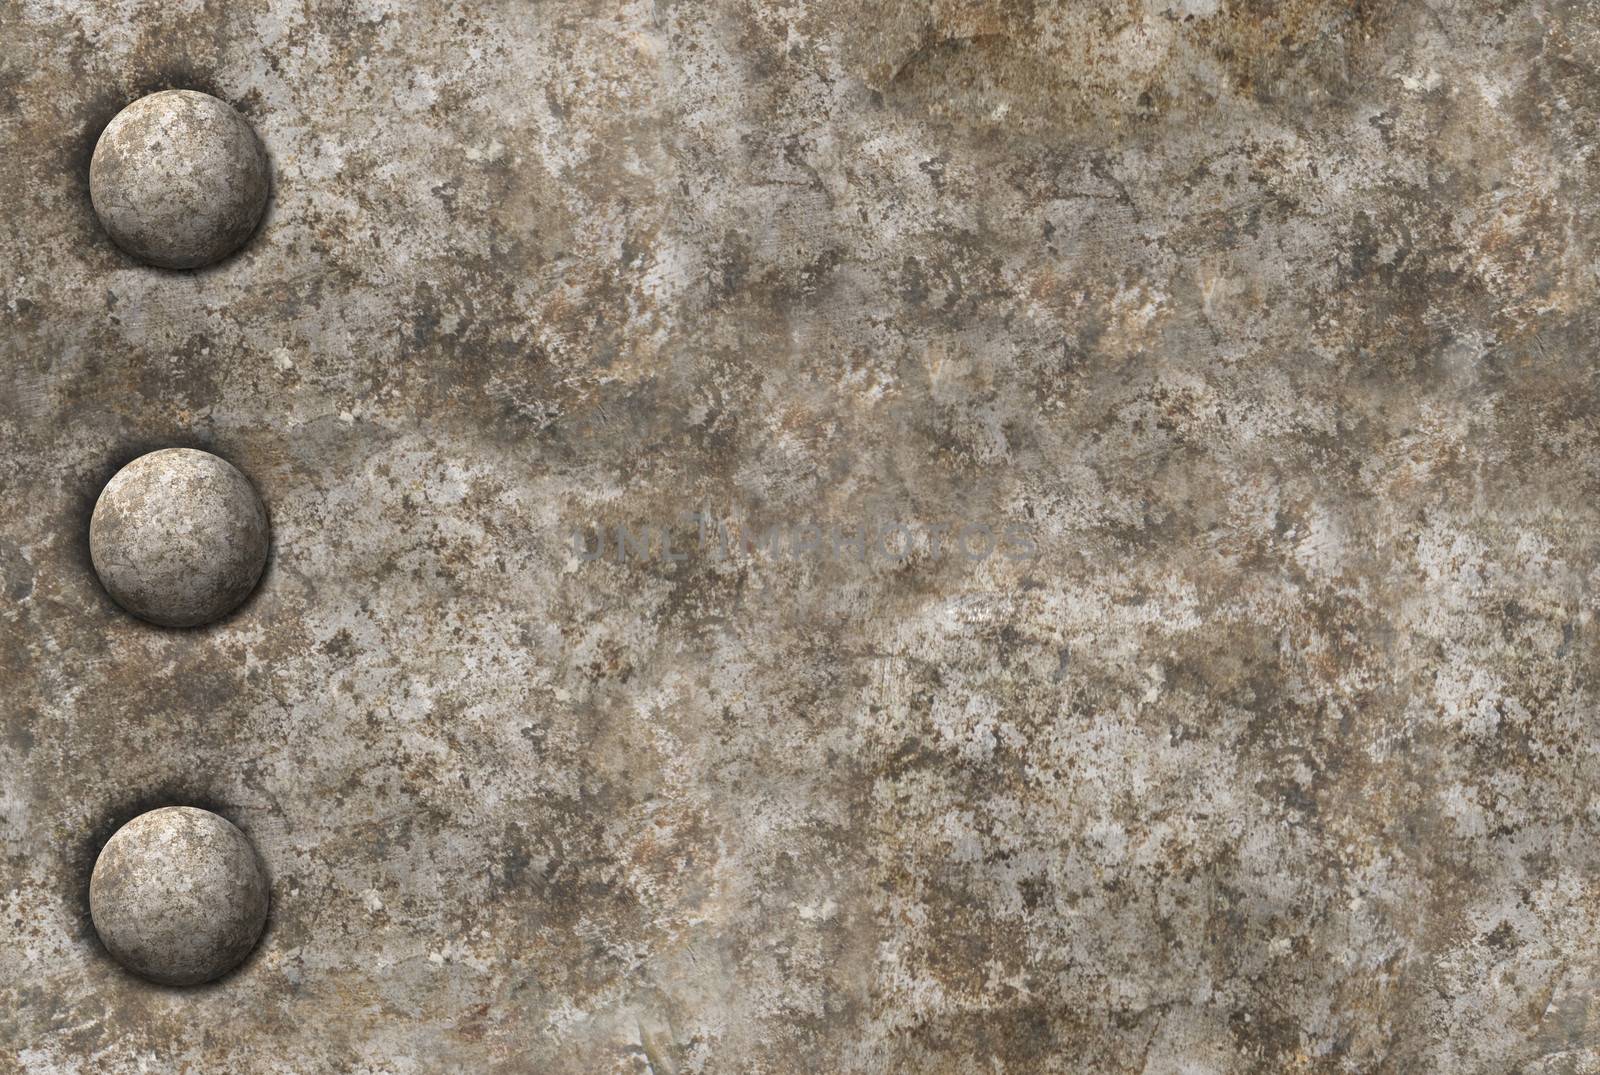 Distressed gray metal surface texture with a row of rivets. Image is seamlessly tileable.